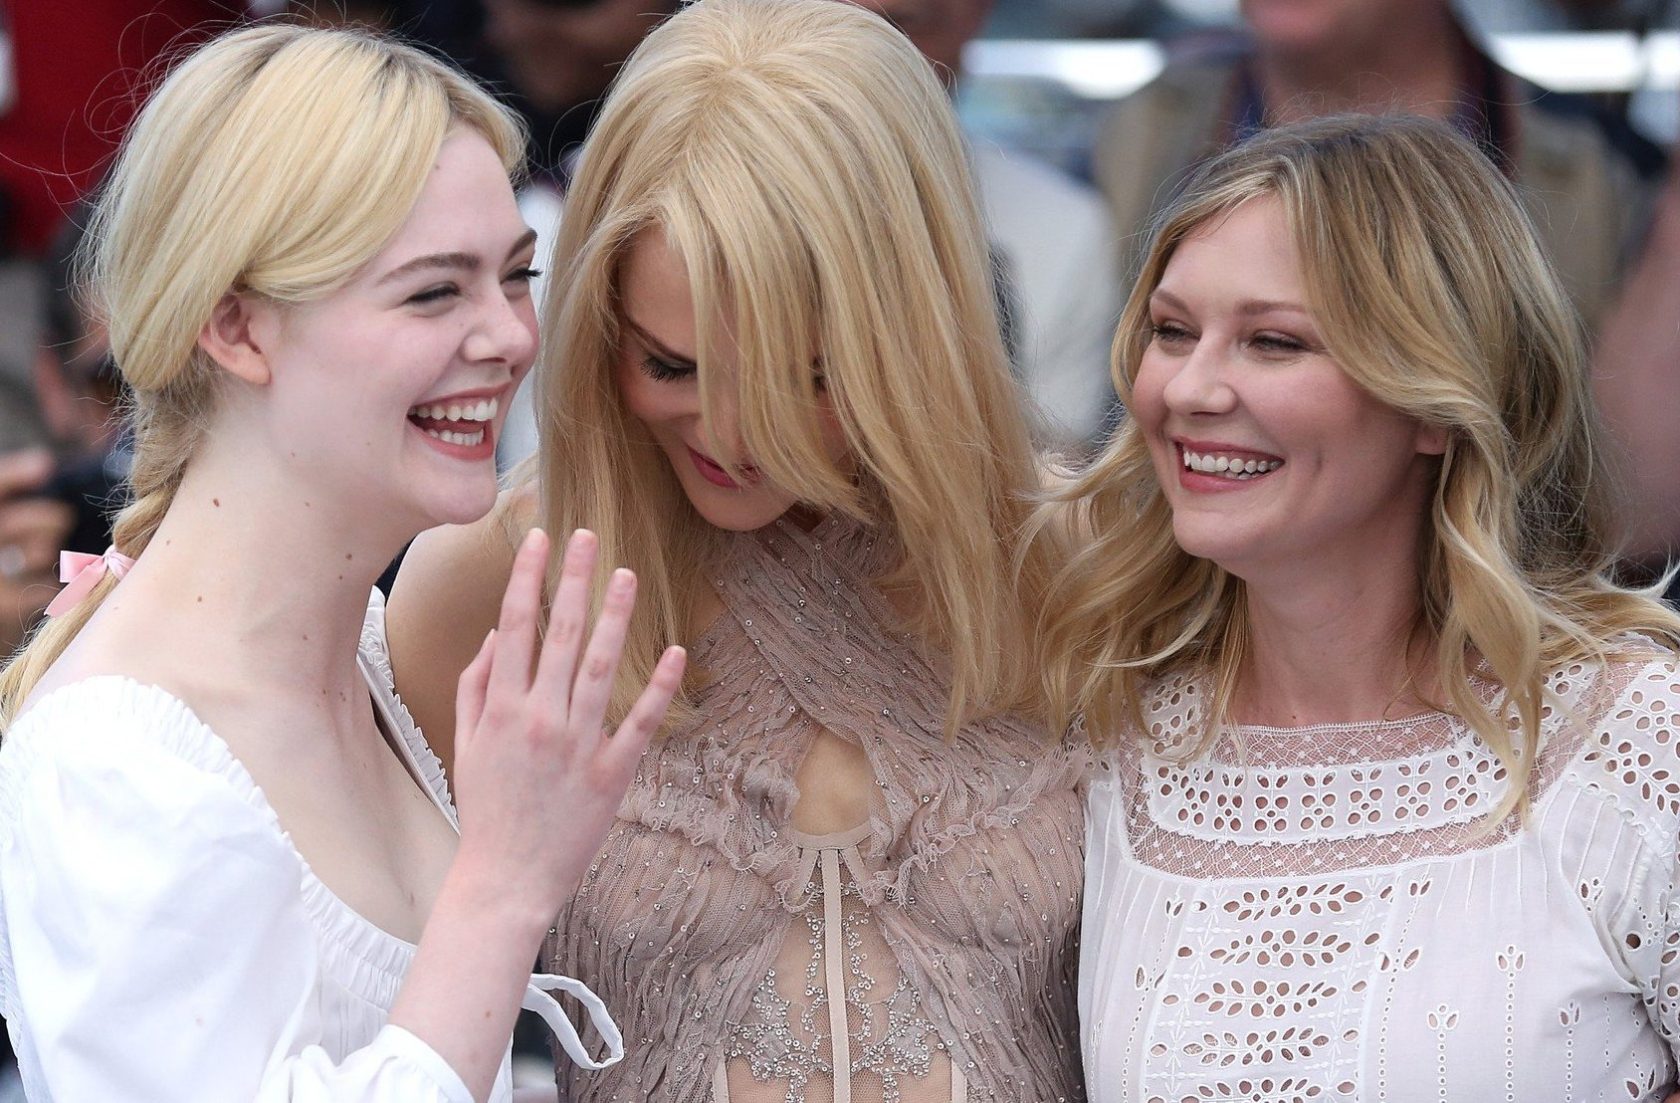 Elle Fanning (L), Nicole Kidman (C) and Kirsten Dunst arrive at a photocall for the film "The Beguiled" during the 70th annual Cannes International Film Festival in Cannes, France on May 24, 2017. Photo by /UPI, Image: 357117222, License: Rights-managed, Restrictions: , Model Release: no, Credit line: Profimedia, UPI